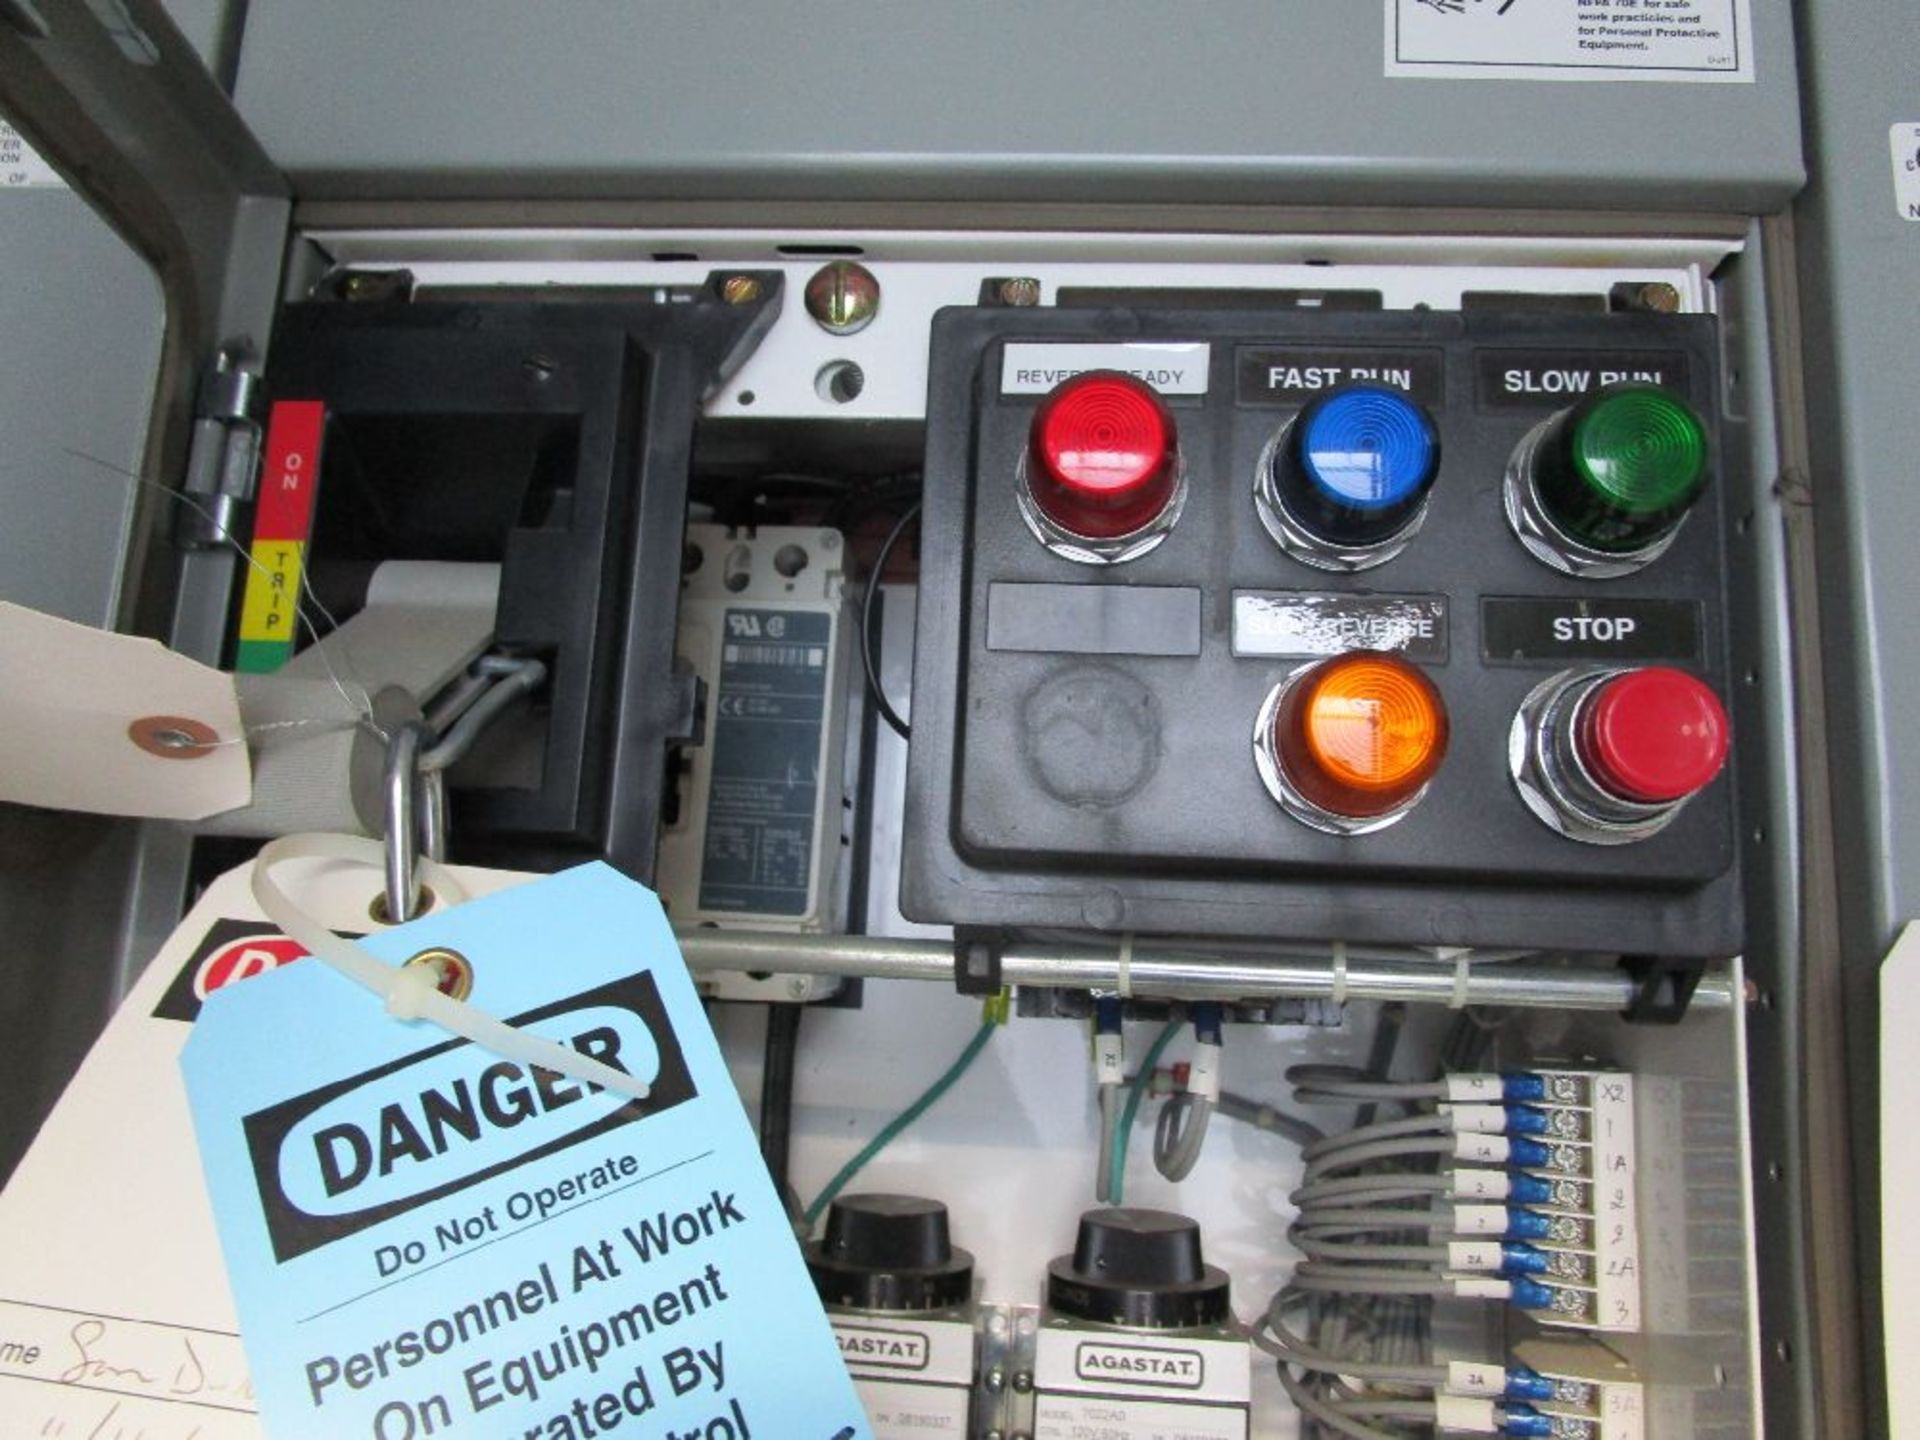 Powell Industries Centeral Power Control Room - Image 5 of 9